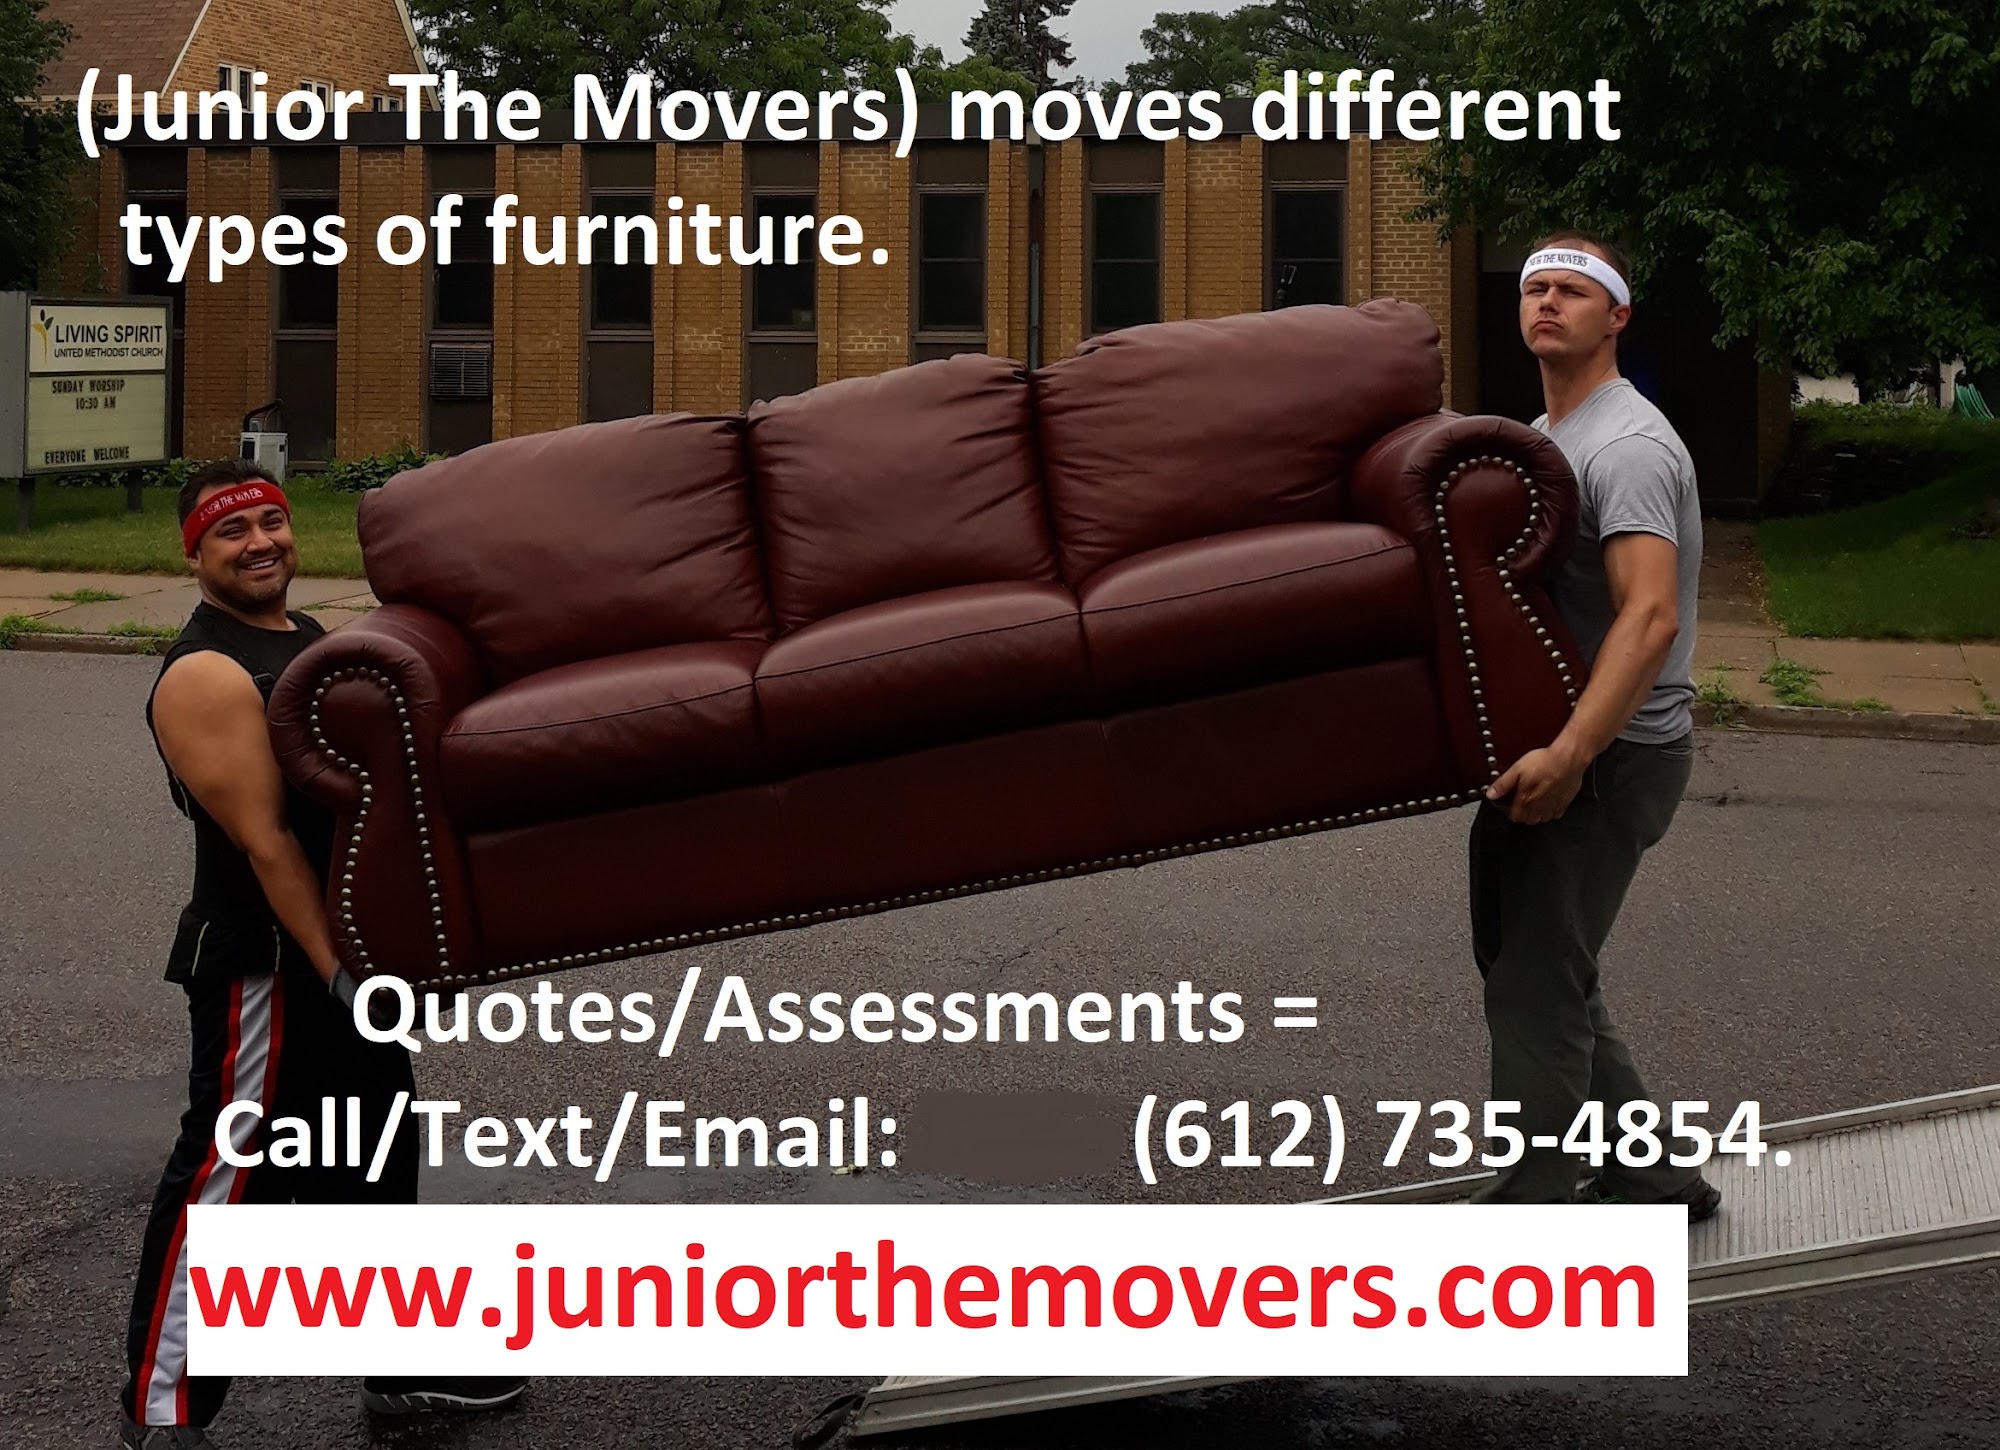 Junior The Movers